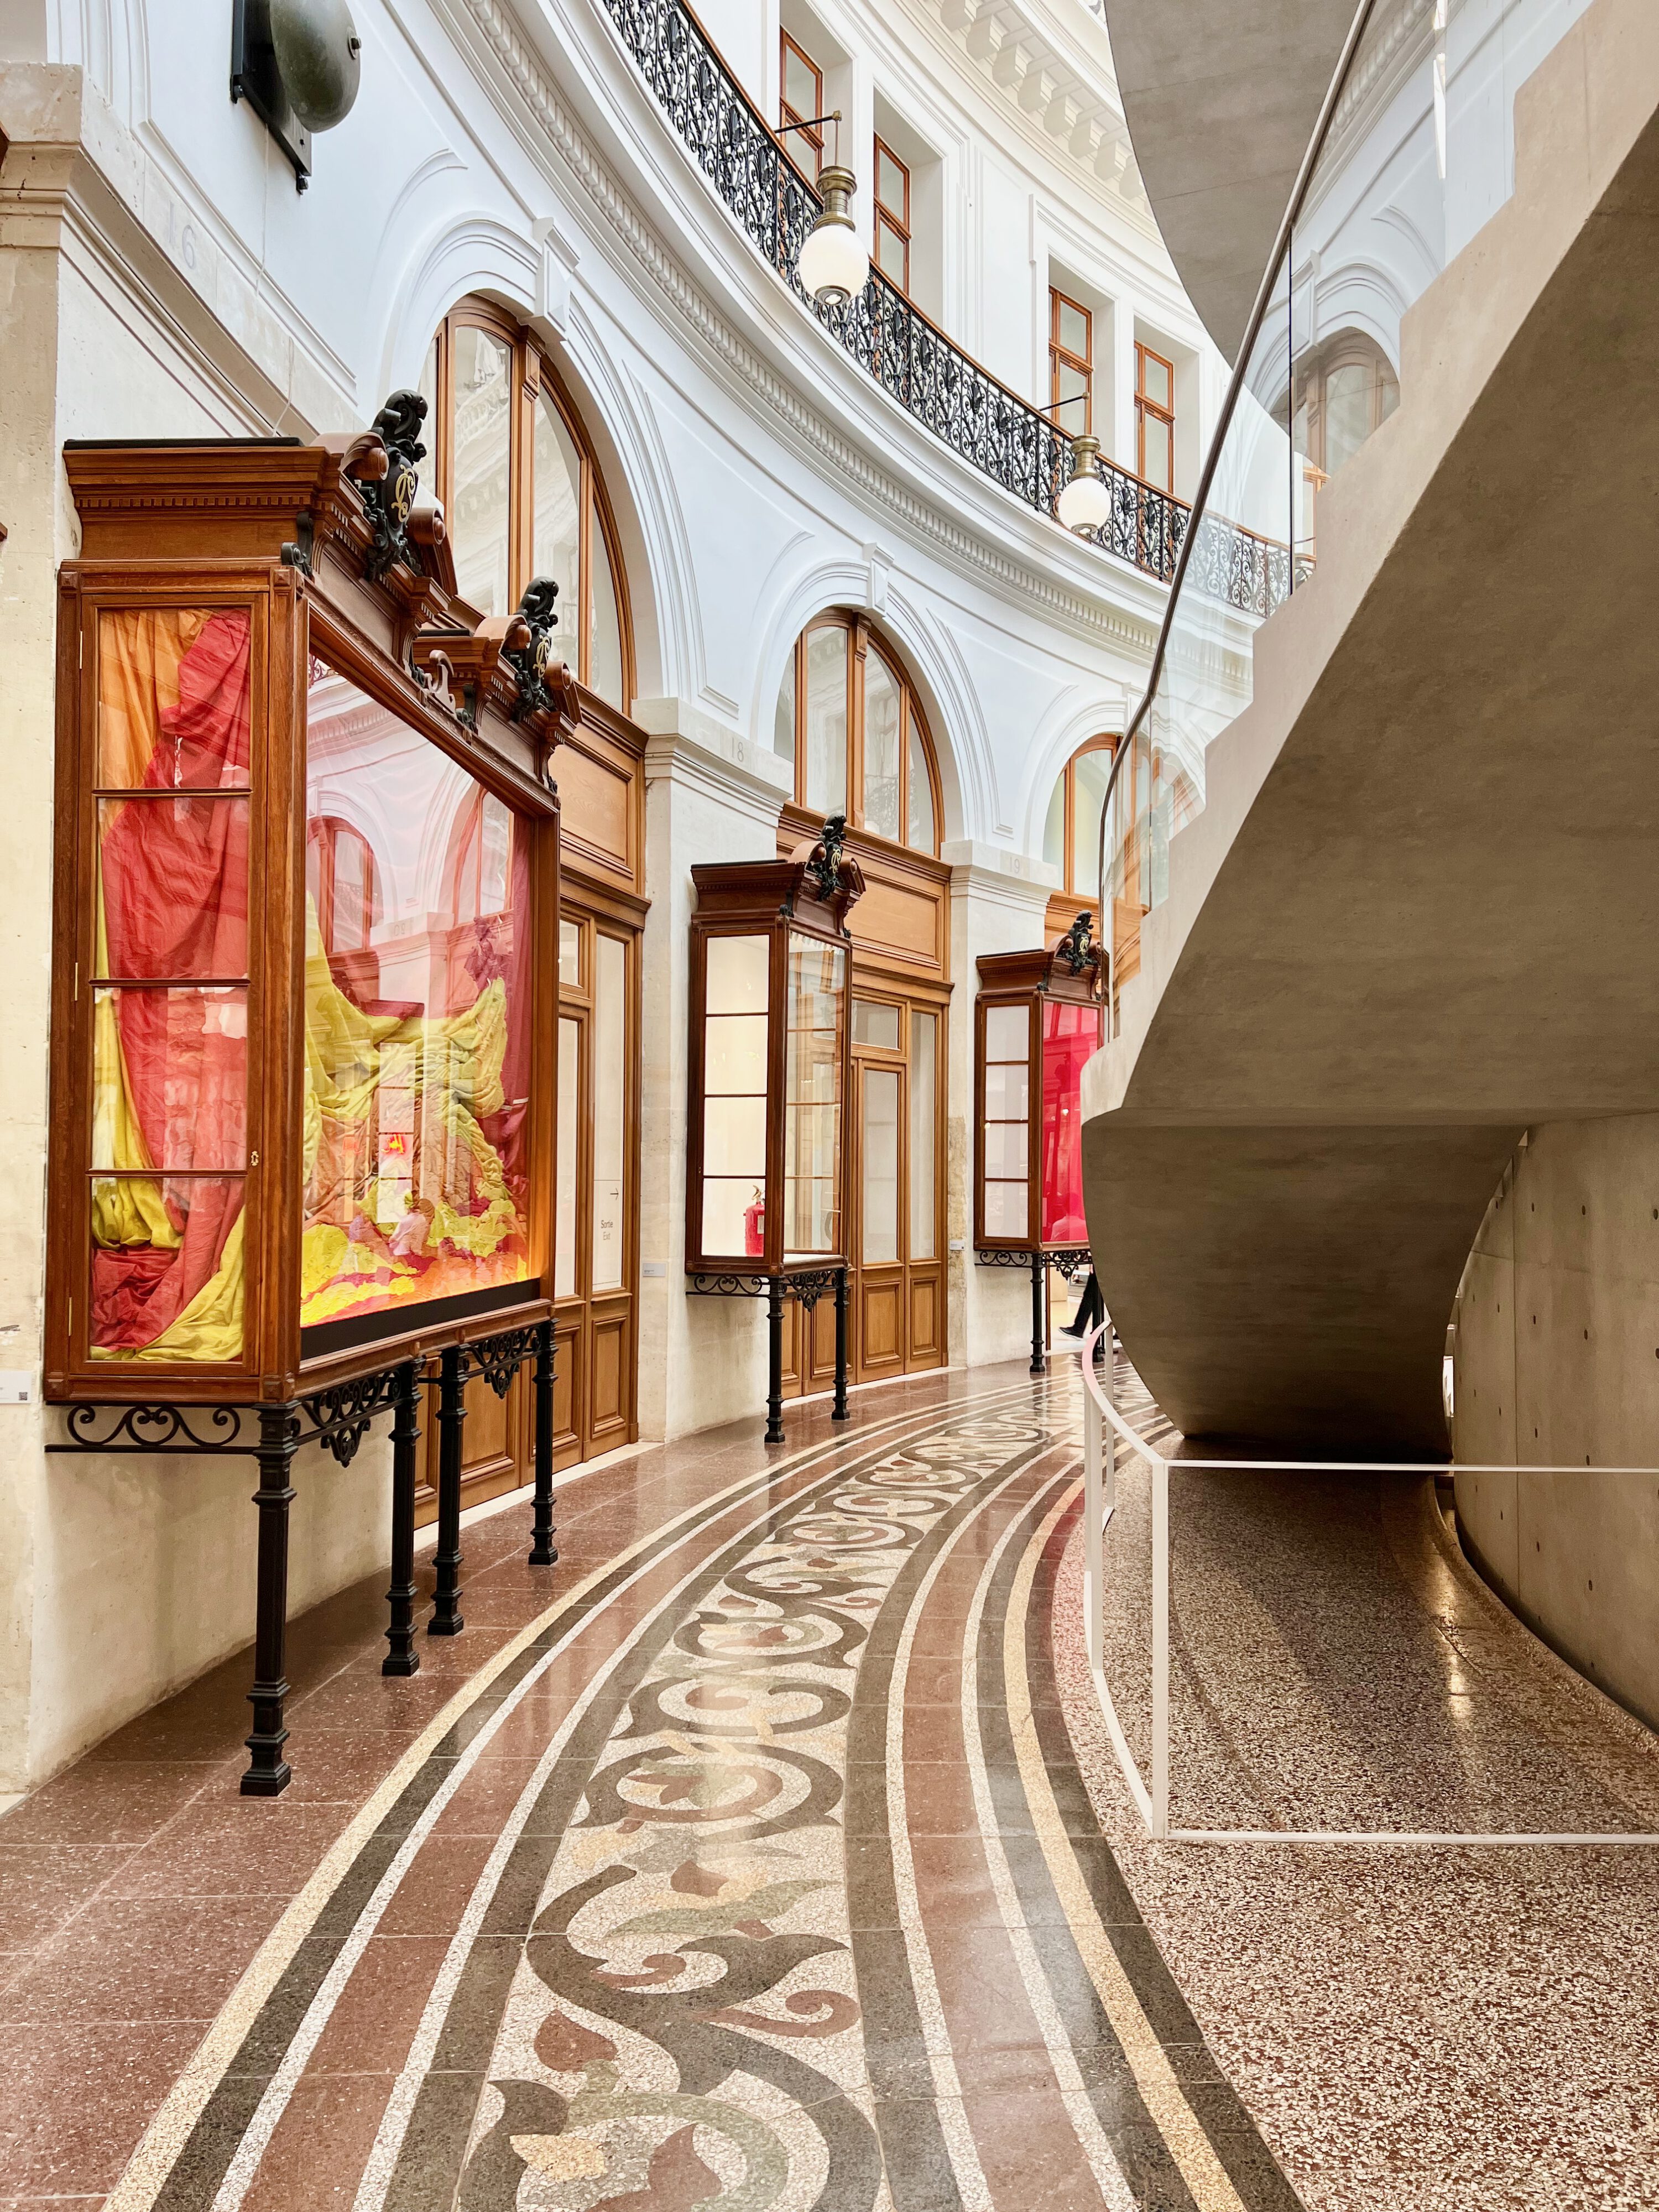 The Bourse de Commerce was restored and transformed by Japanese architect Tadao Ando